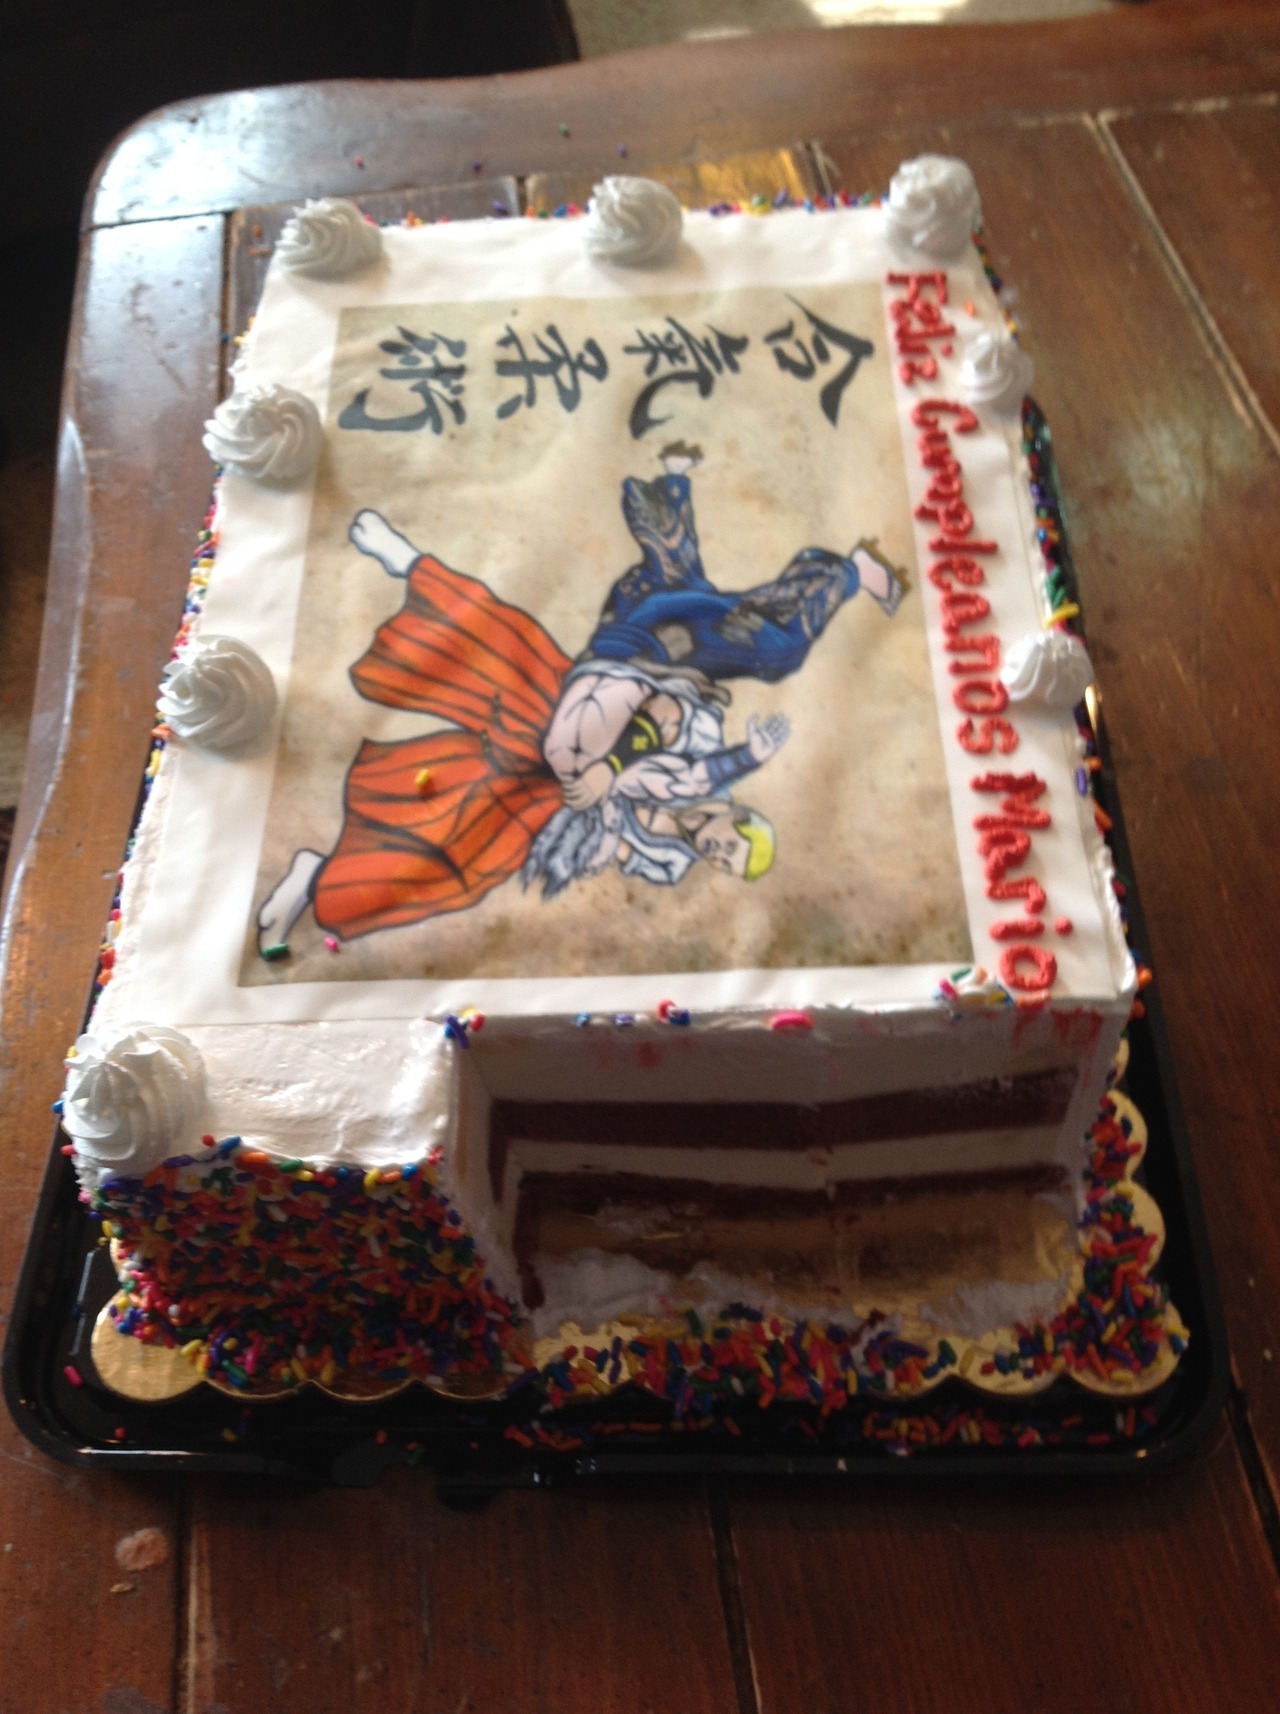 Coolest DIY Birthday Cakes  Martial Arts Cakes